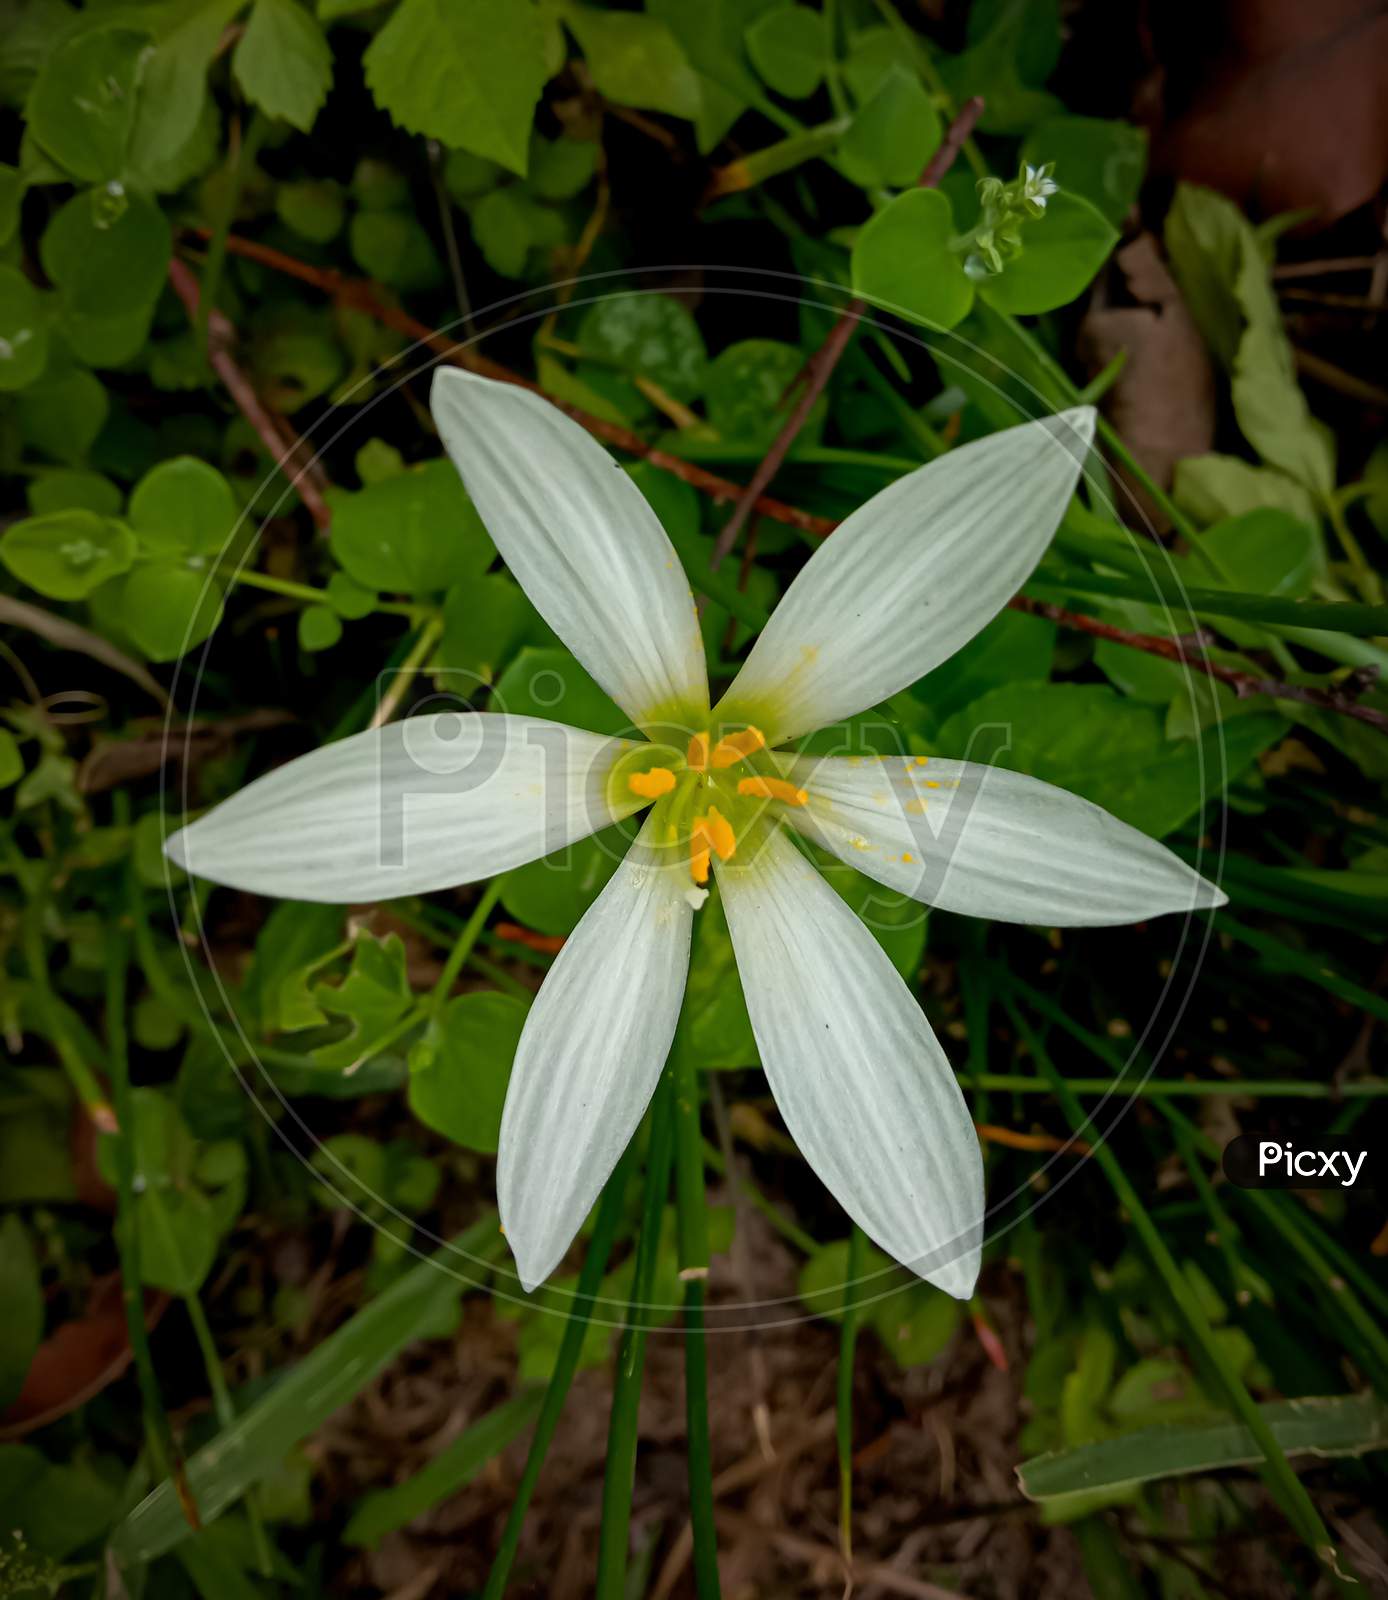 Indian Zephyranthes Candida, A Member Of The Amaryllis Family.